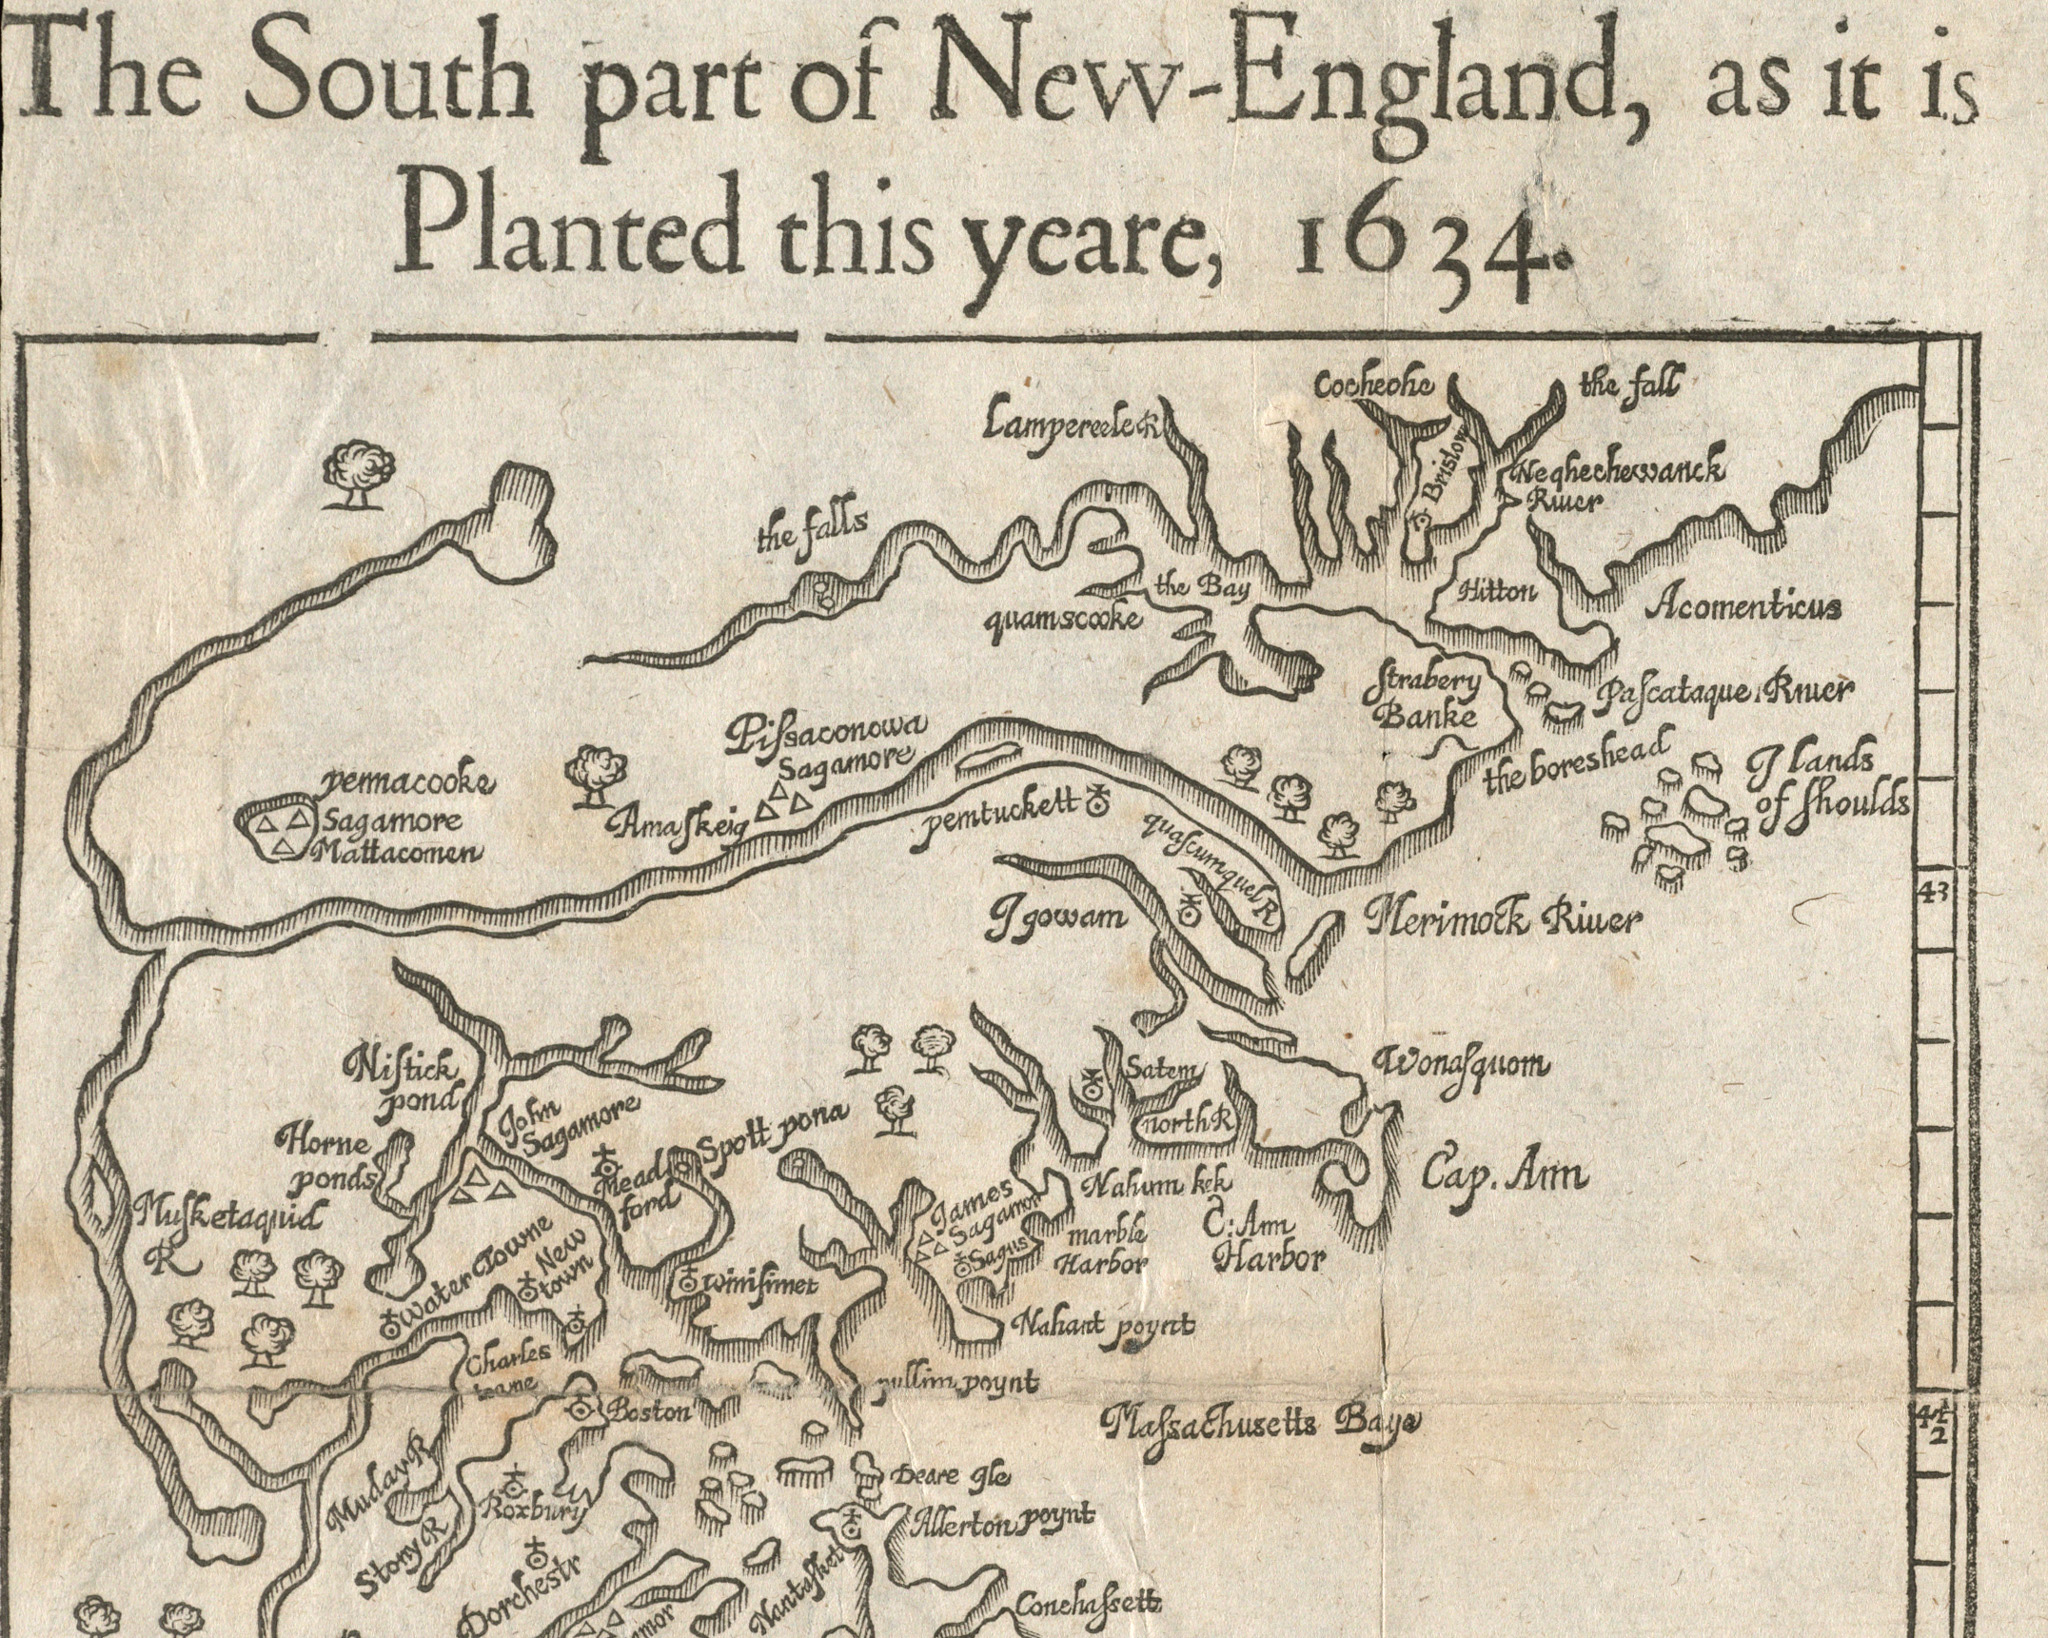 The south part of New England as it planted this yeare